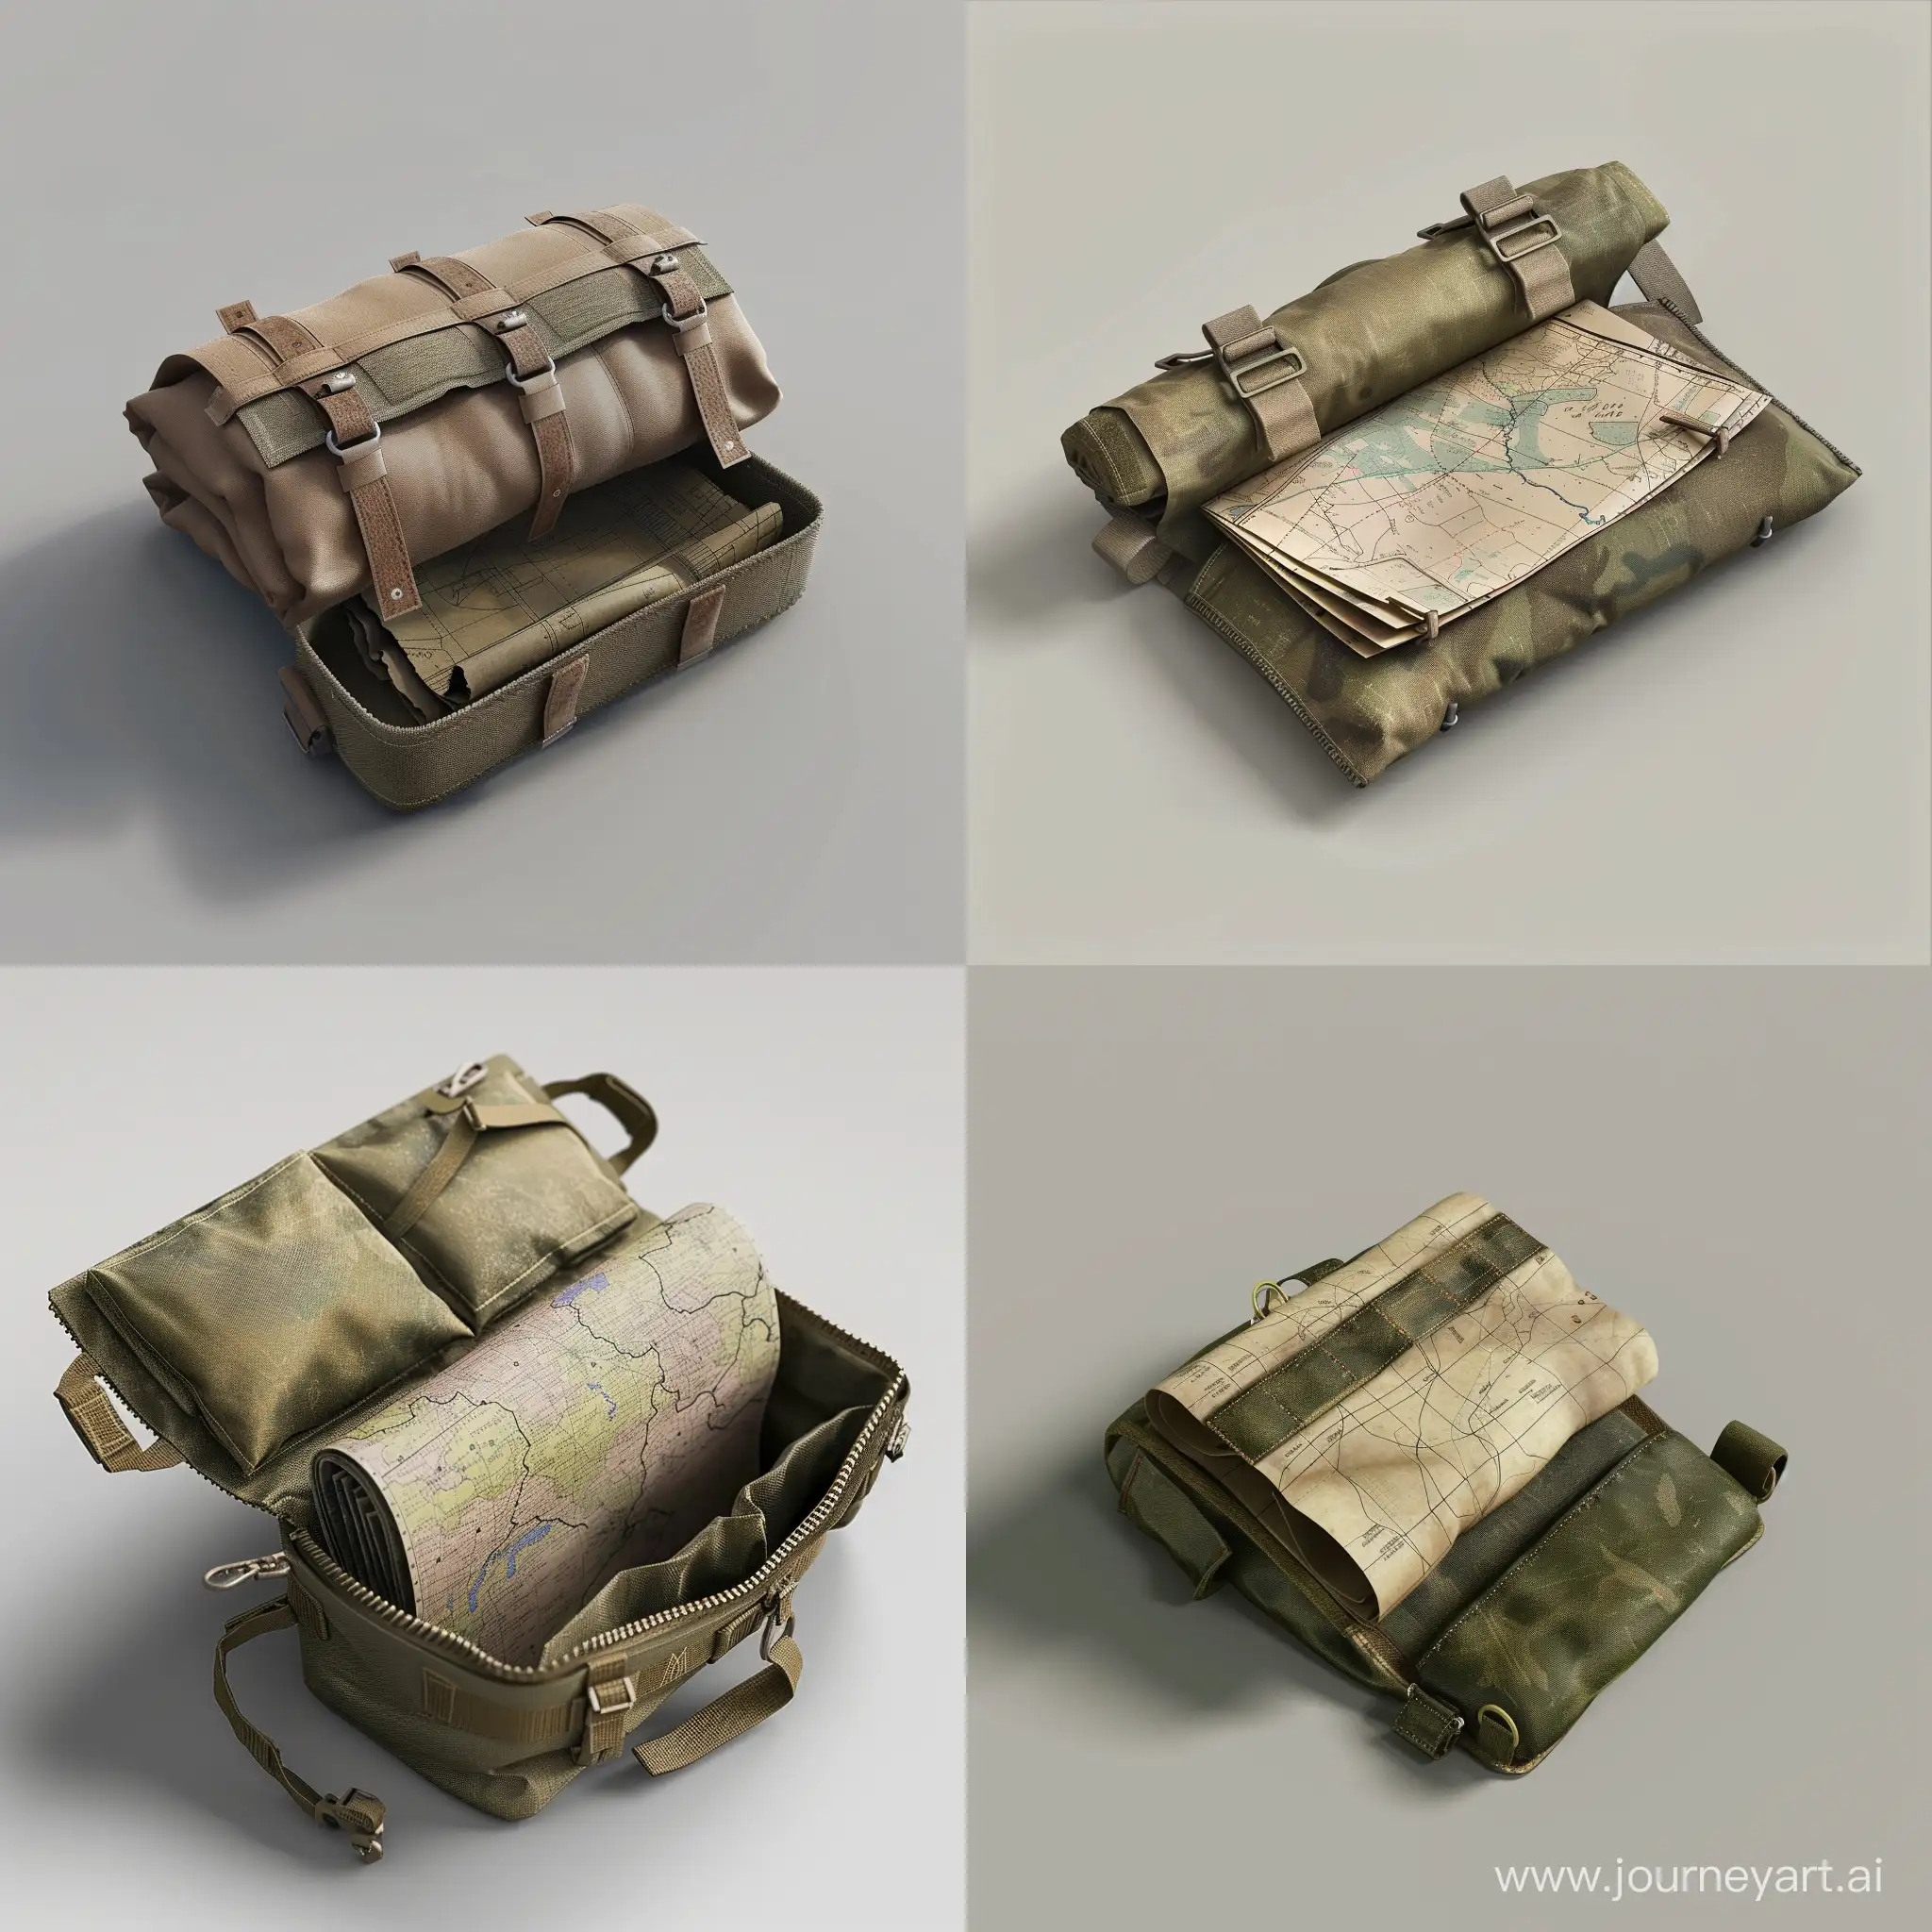 Isometric-Military-Mapping-Kit-in-Small-Opened-Pouch-Stalker-Style-3D-Render